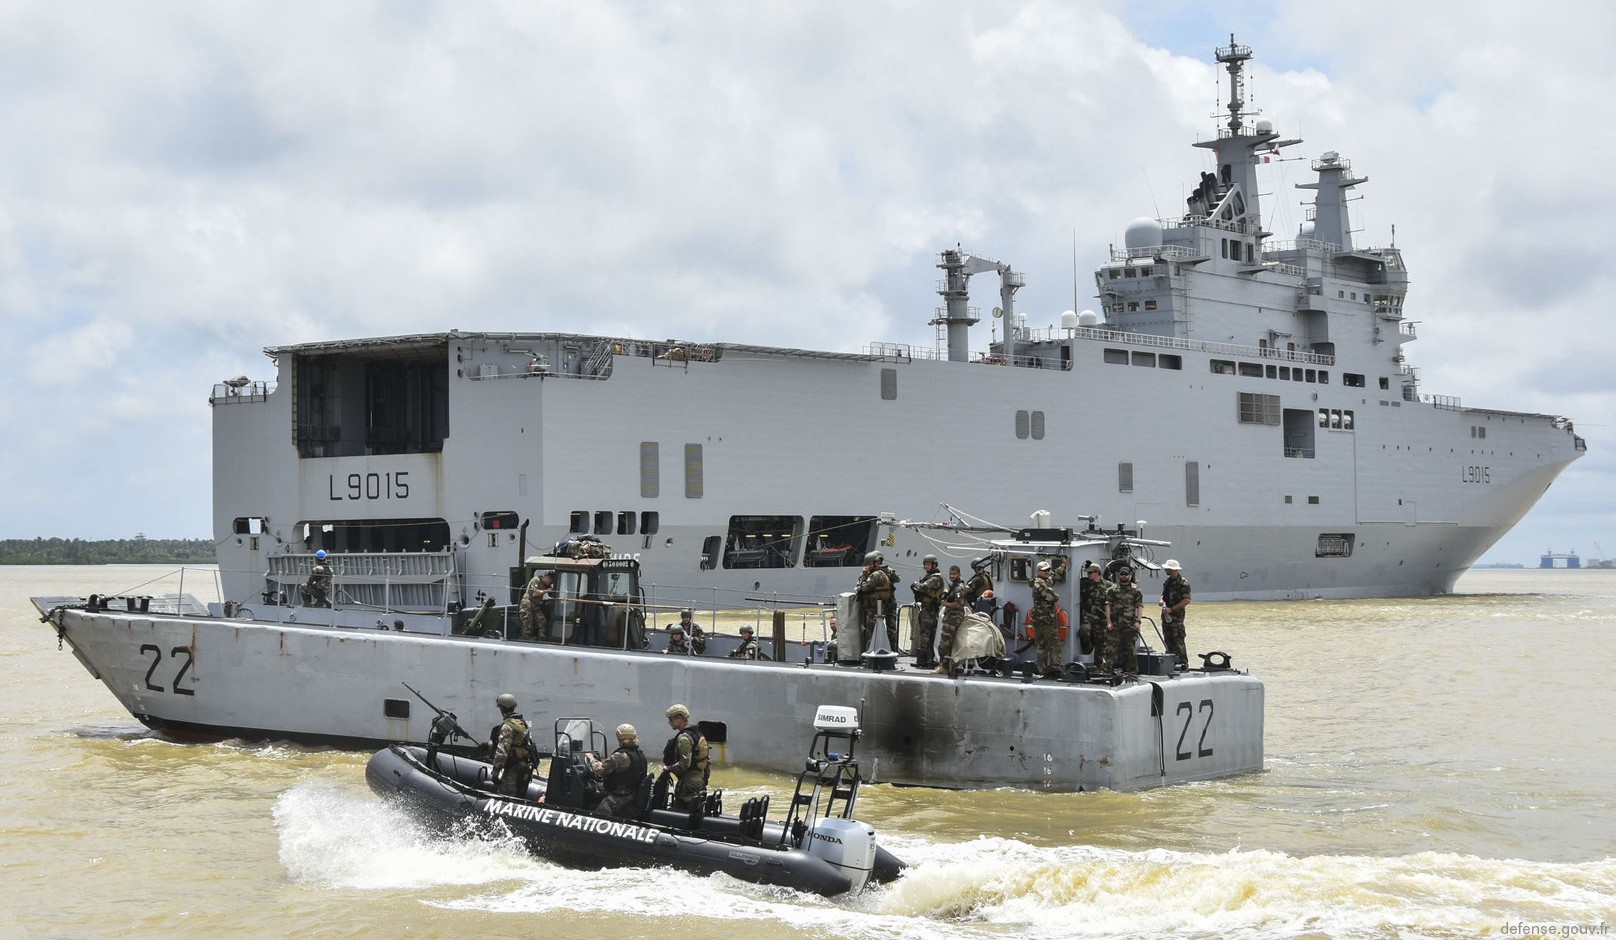 l-9015 fs dixmude mistral class amphibious assault command ship bpc french navy marine nationale 07 landing craft ctm